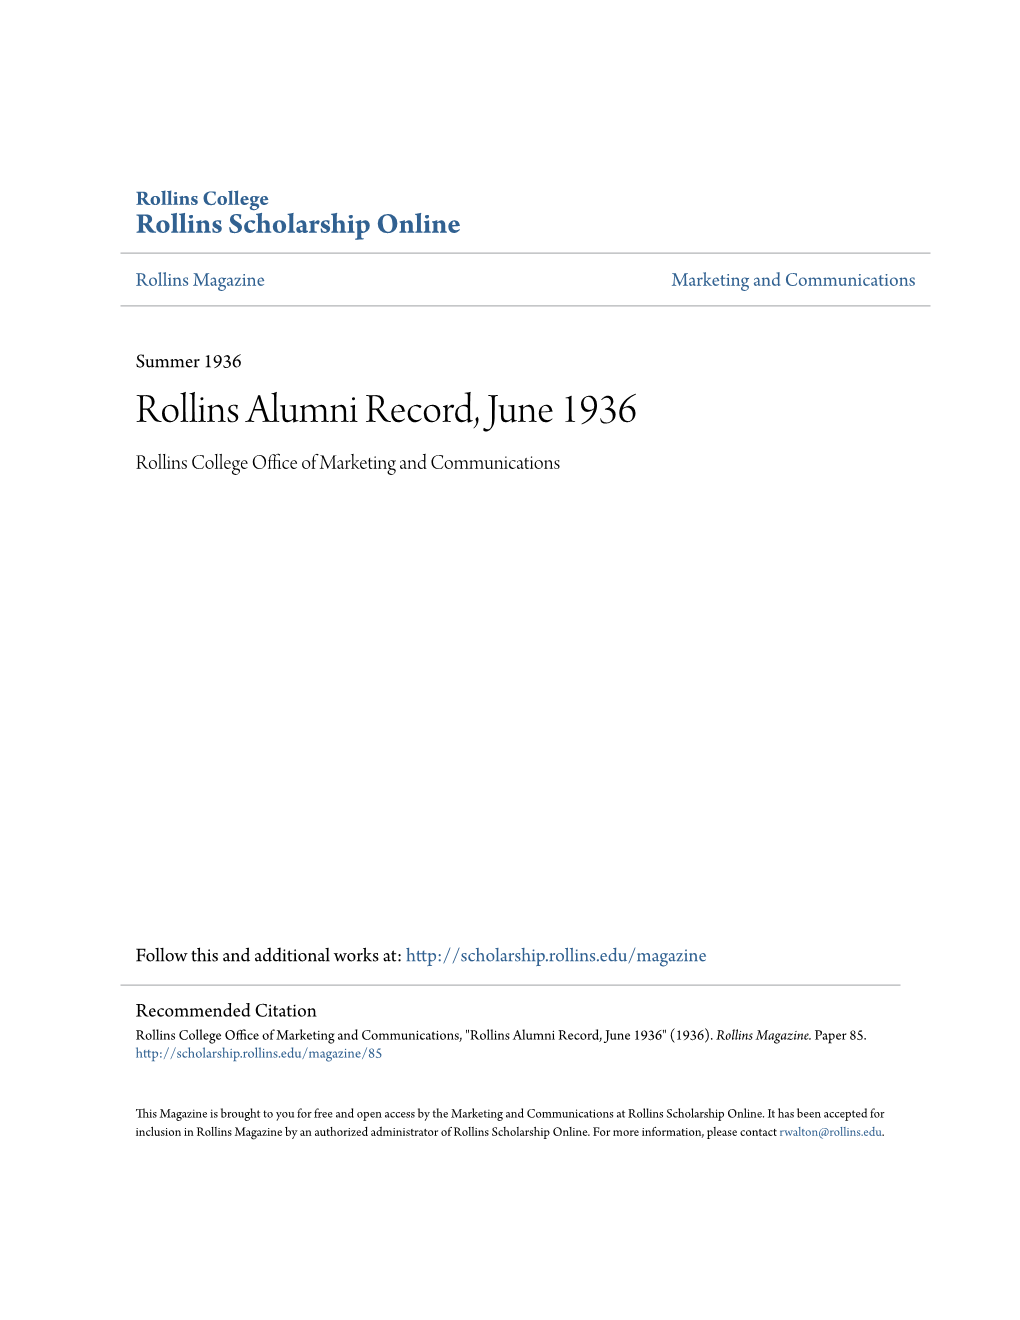 Rollins Alumni Record, June 1936 Rollins College Office Ofa M Rketing and Communications